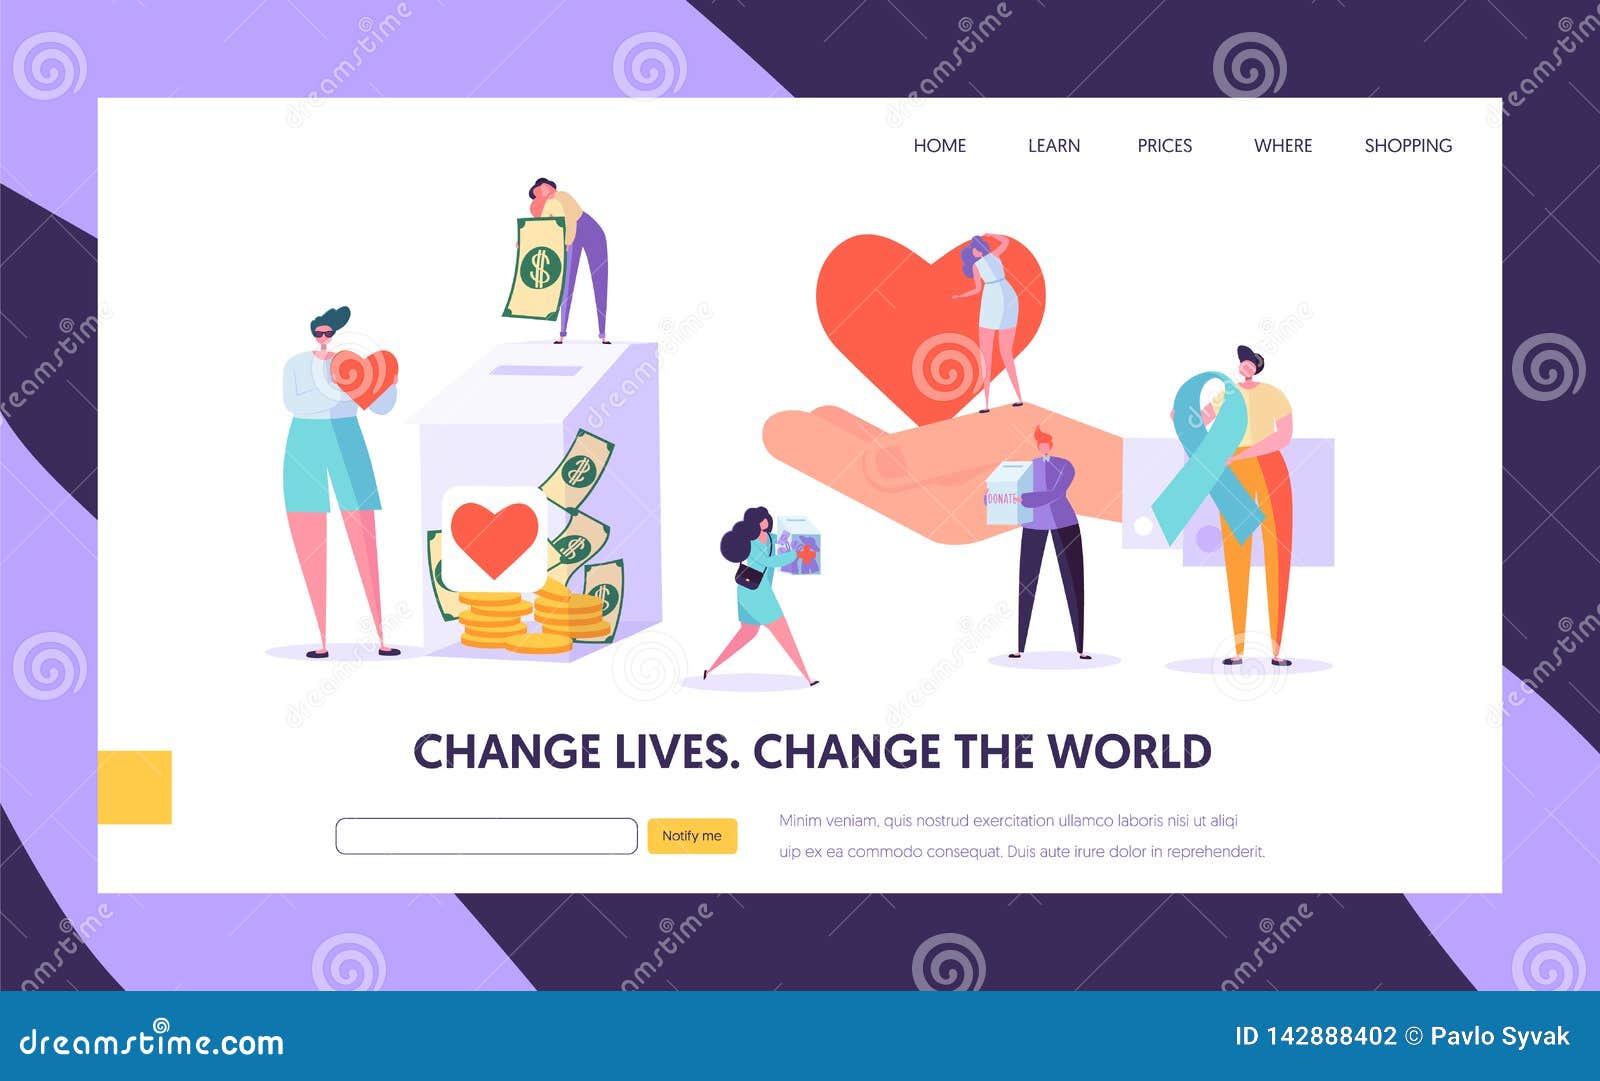 charity donation change the world landing page. give hope for needing help character and save life. donate healthy